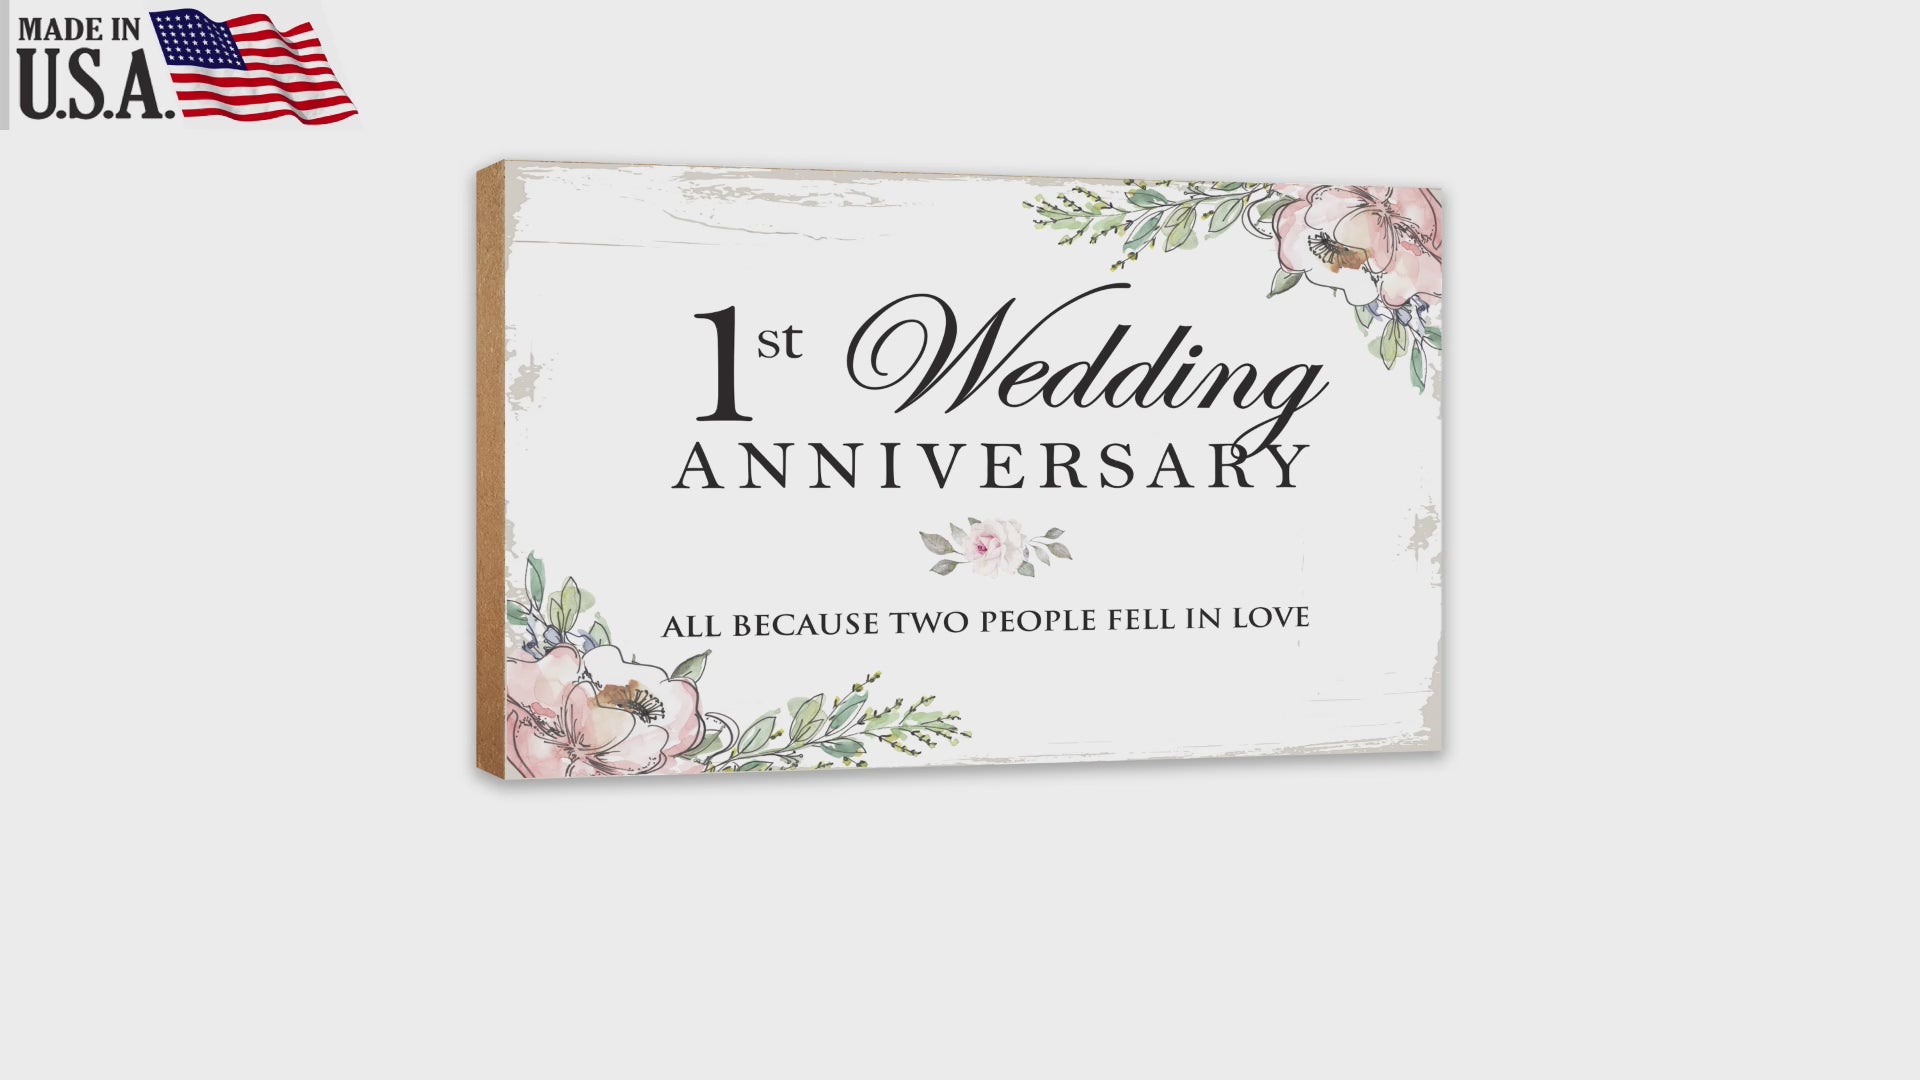 1st Wedding Anniversary Unique Shelf Decor and Tabletop Signs Gift for Couples - Fell In Love